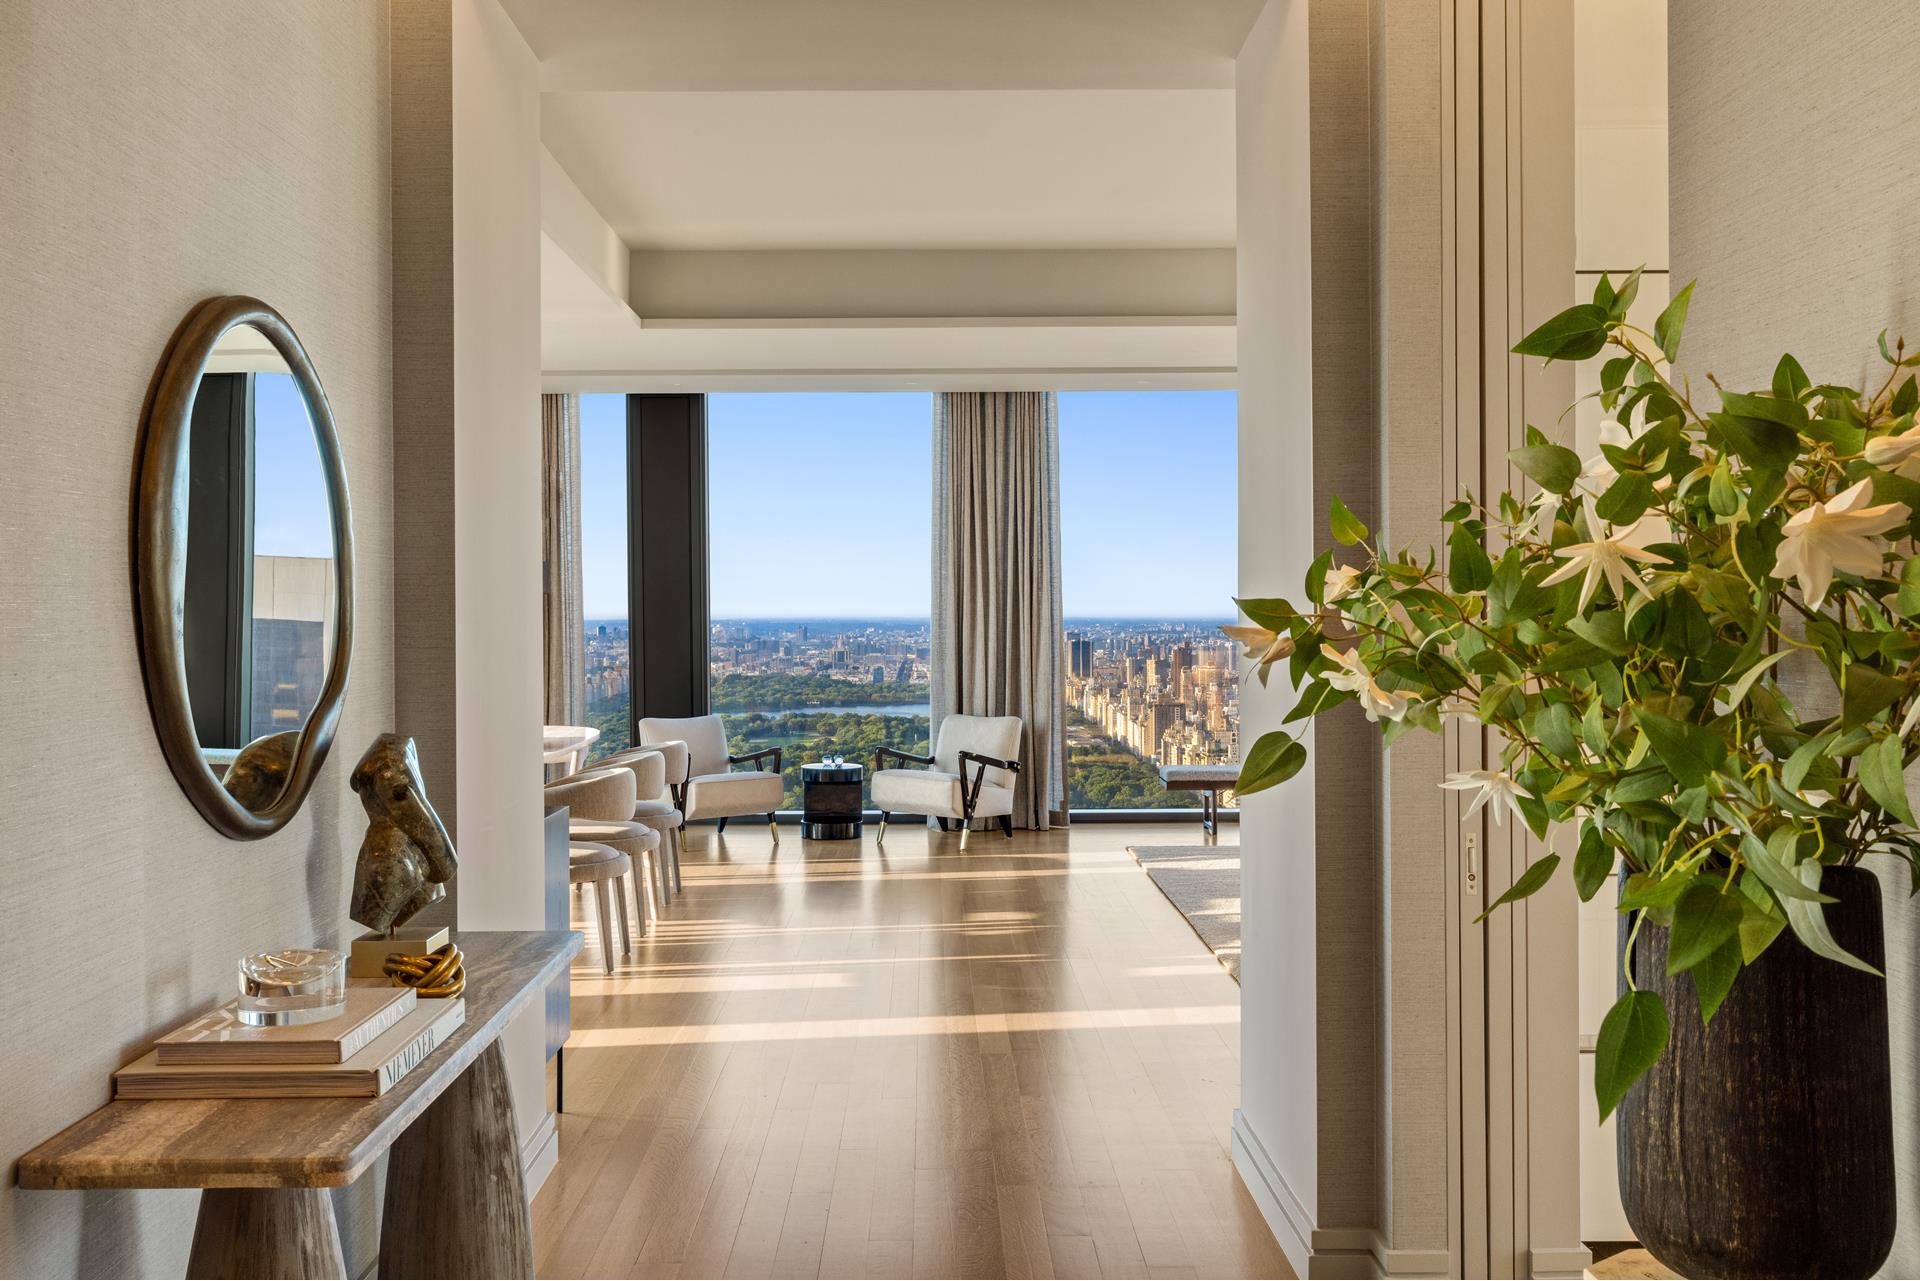 53 West 53rd Street 57A, Chelsea And Clinton, Downtown, NYC - 3 Bedrooms  
3.5 Bathrooms  
5 Rooms - 